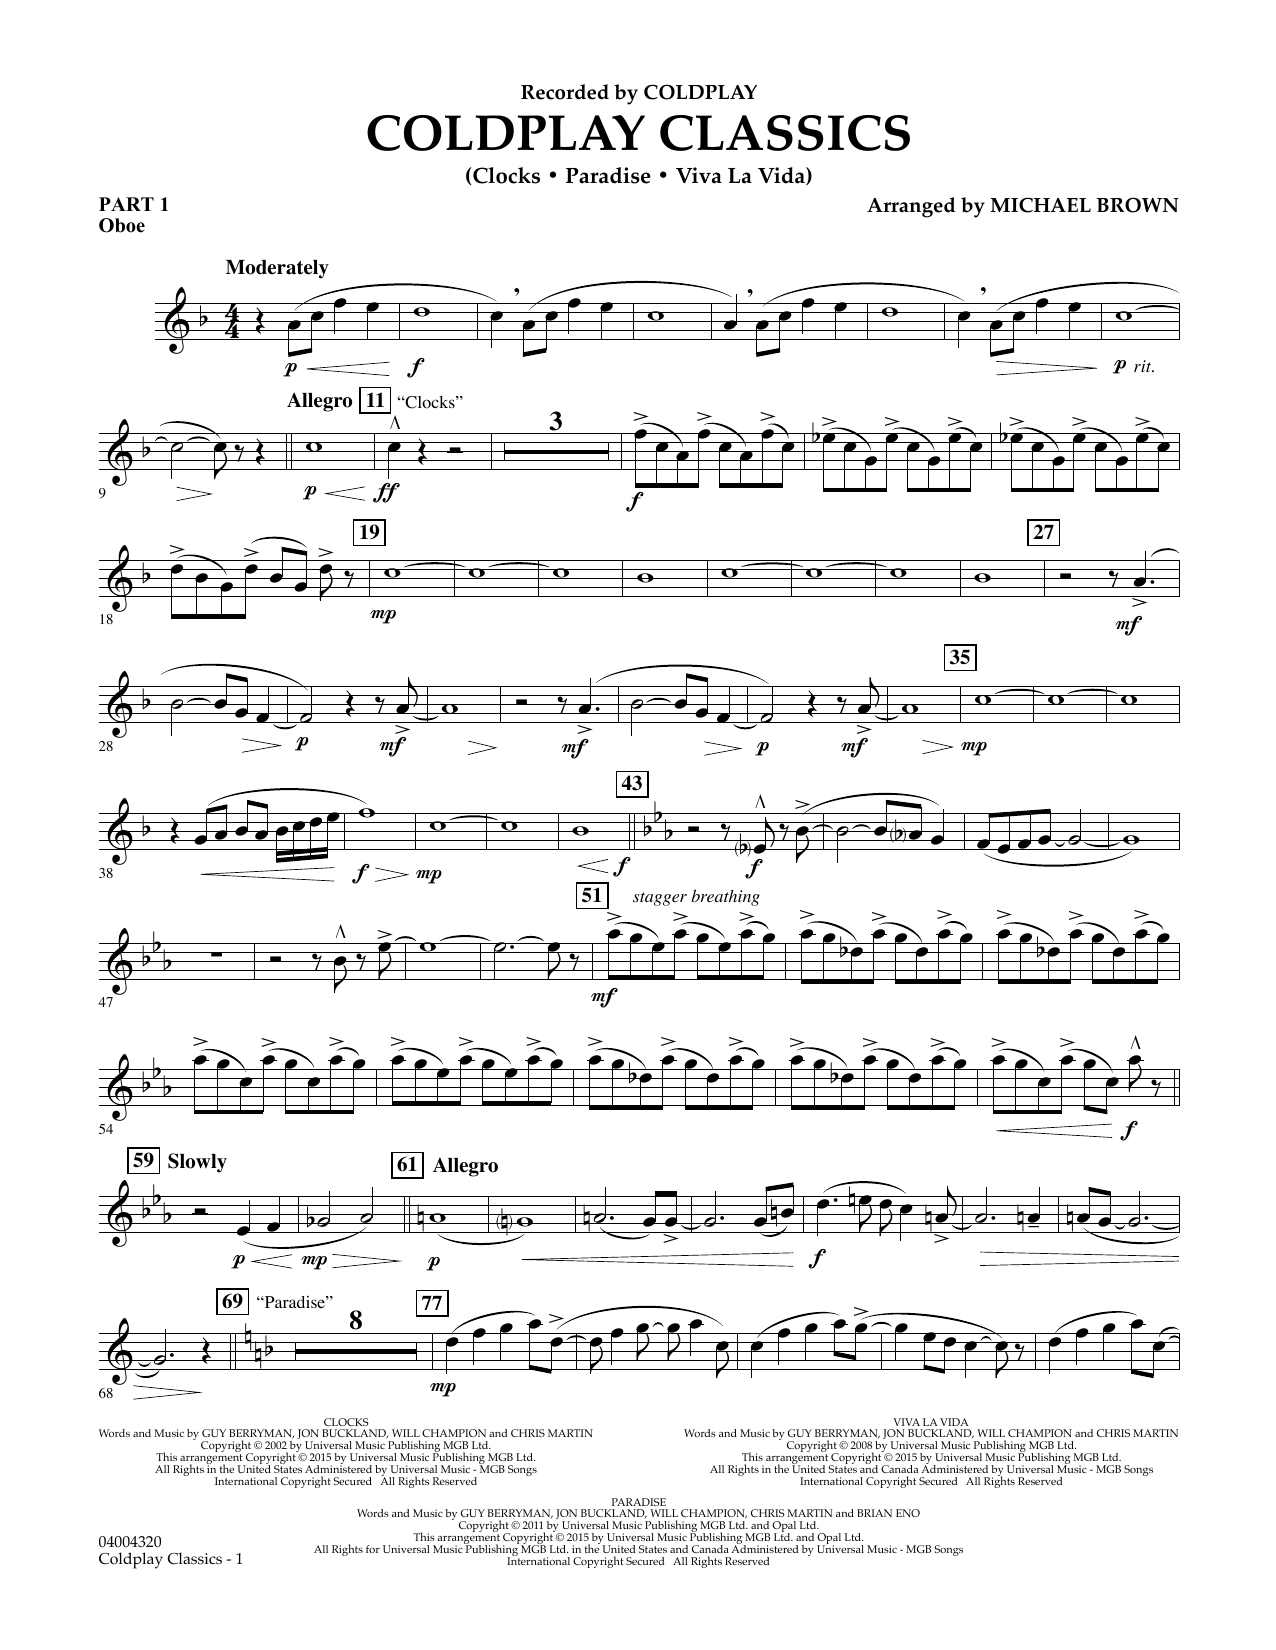 Michael Brown Coldplay Classics - Pt.1 - Oboe sheet music notes and chords. Download Printable PDF.